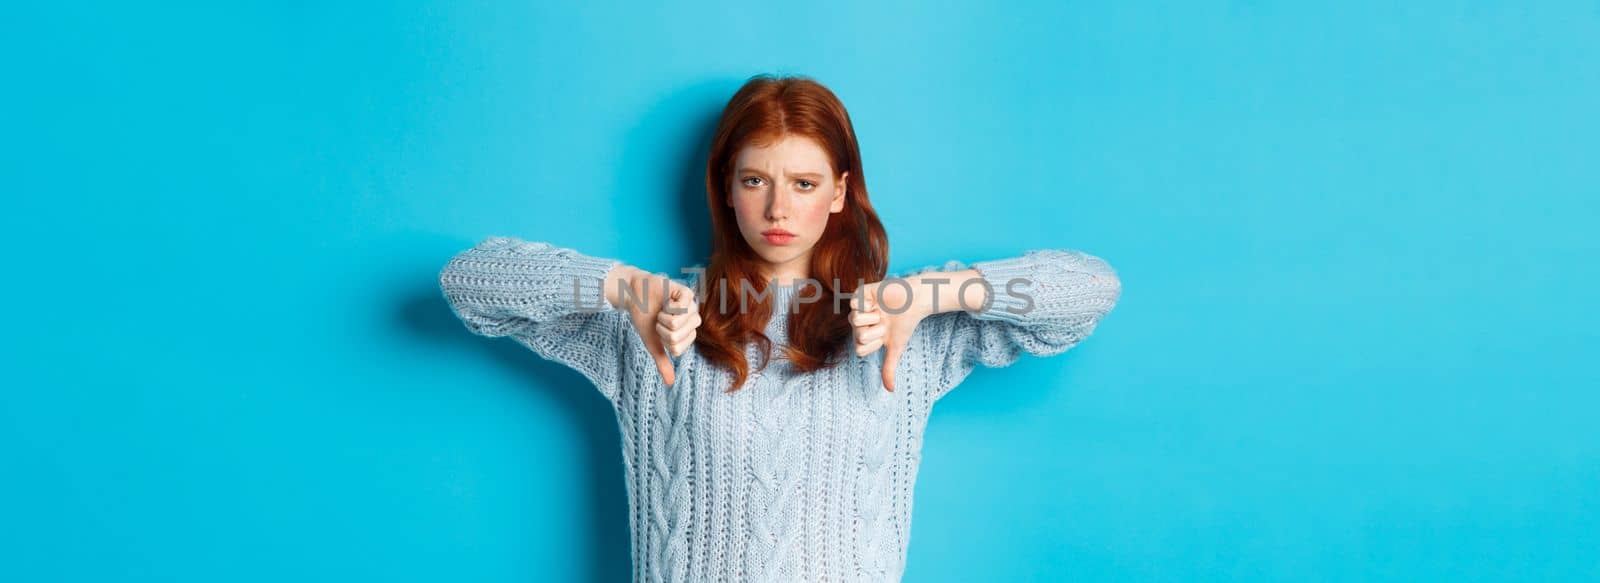 Disappointed redhead girl in sweater showing thumbs-down, judging bad product, disagree and dislike promo, standing over blue background.